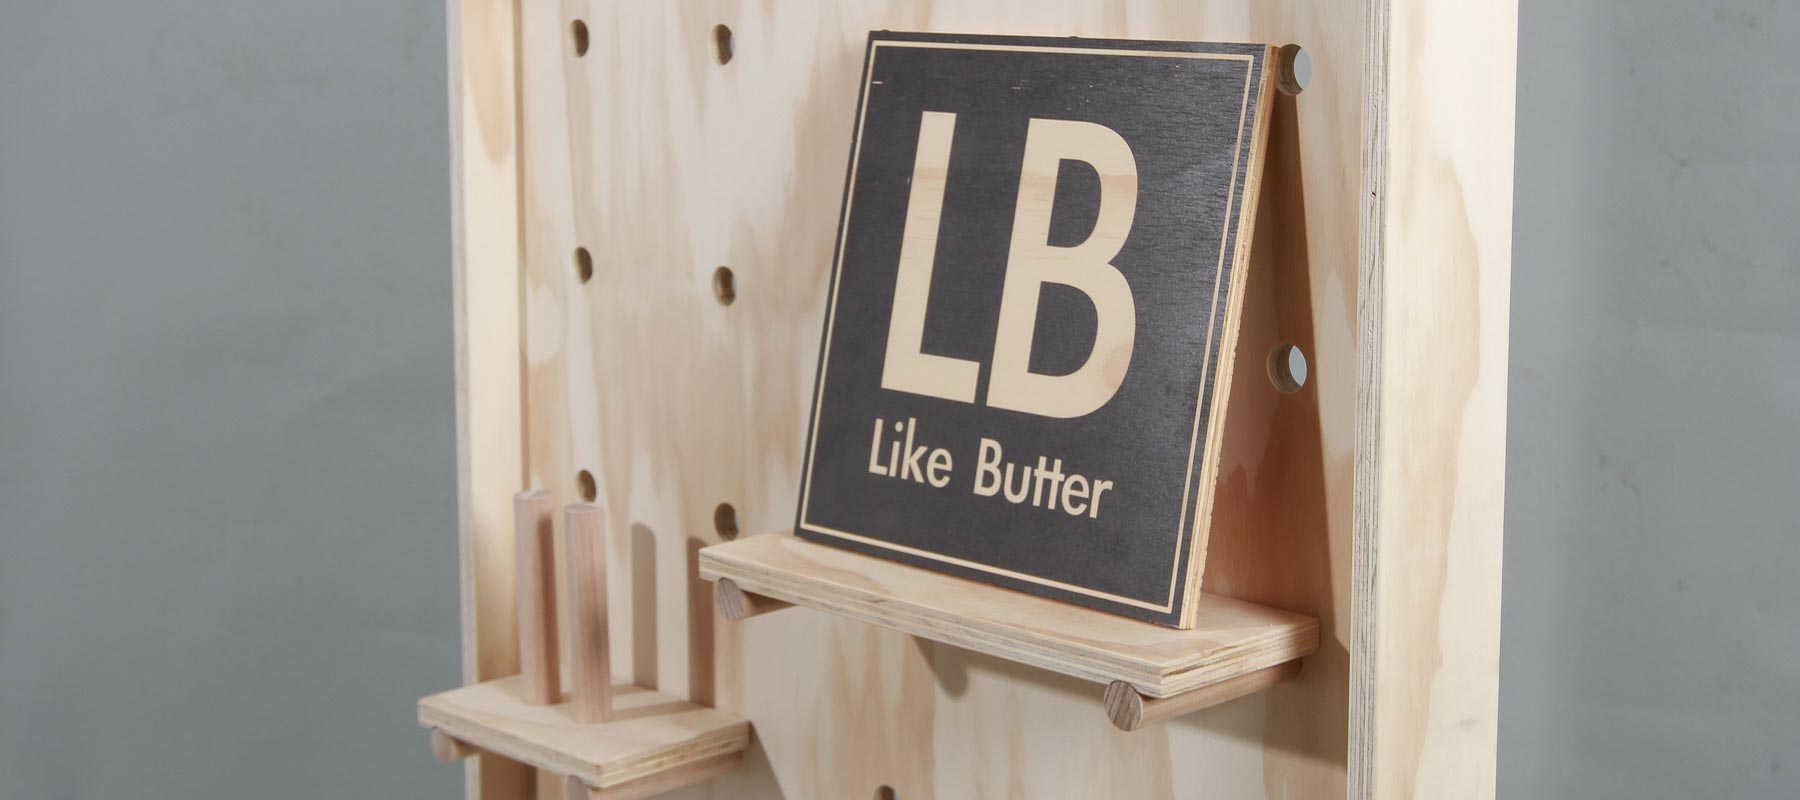 A Like Butter pegboard with CNC machined sign